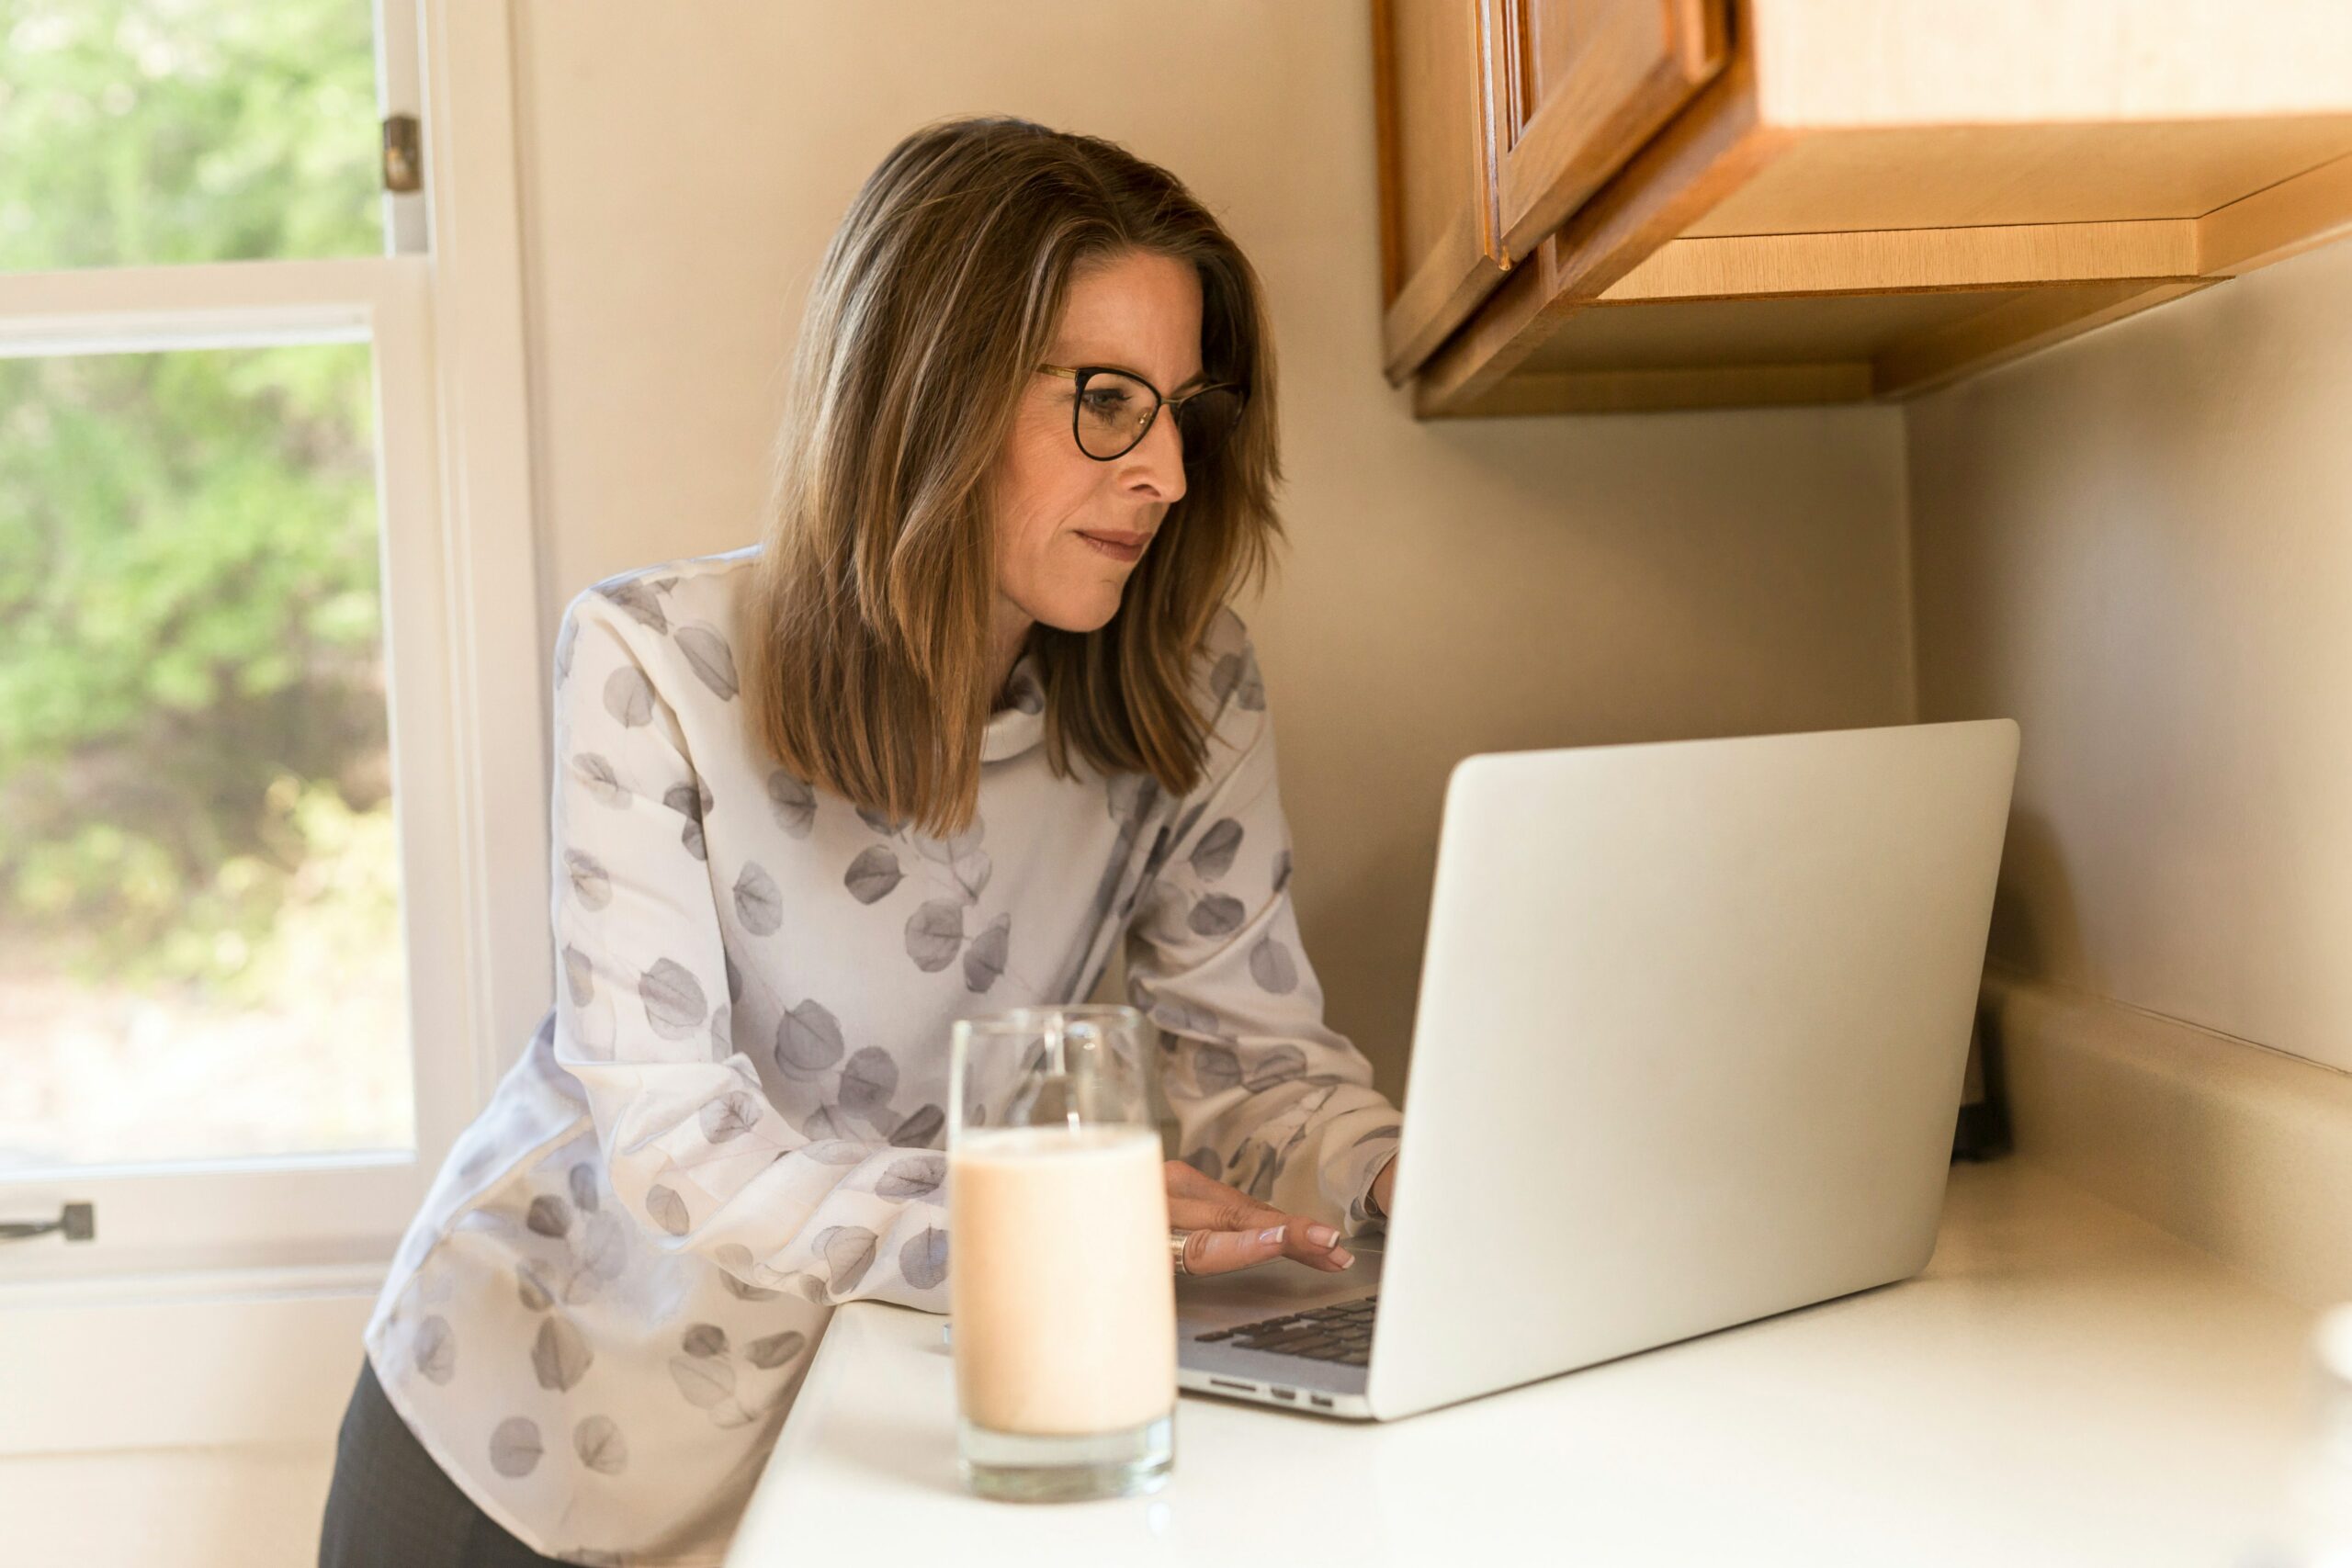 A woman in a kitchen wearing glasses looks at her laptop